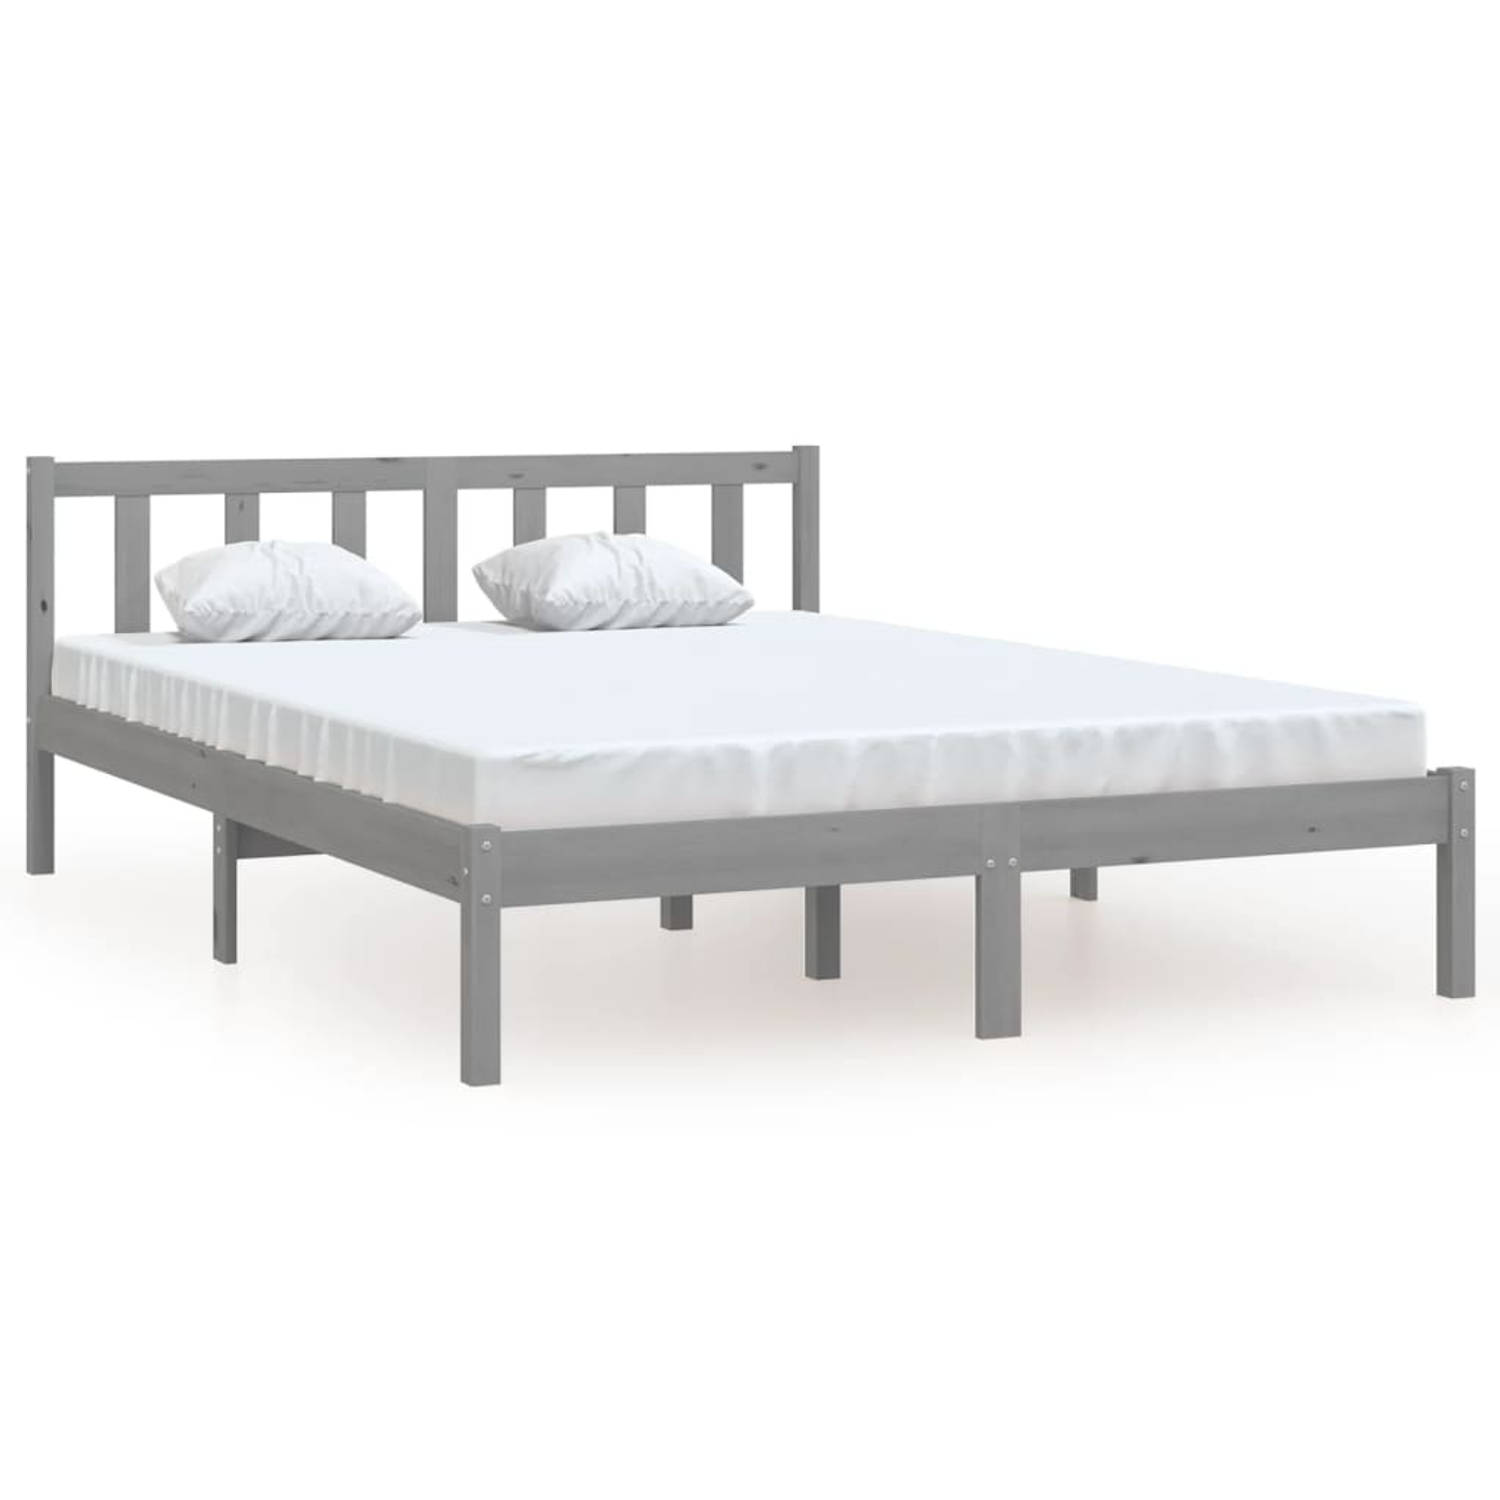 The Living Store Bedframe massief grenenhout grijs 160x200 cm - Bedframe - Bedframe - Bed Frame - Bed Frames - Bed - Bedden - 1-persoonsbed - 1-persoonsbedden - Eenpersoons Bed